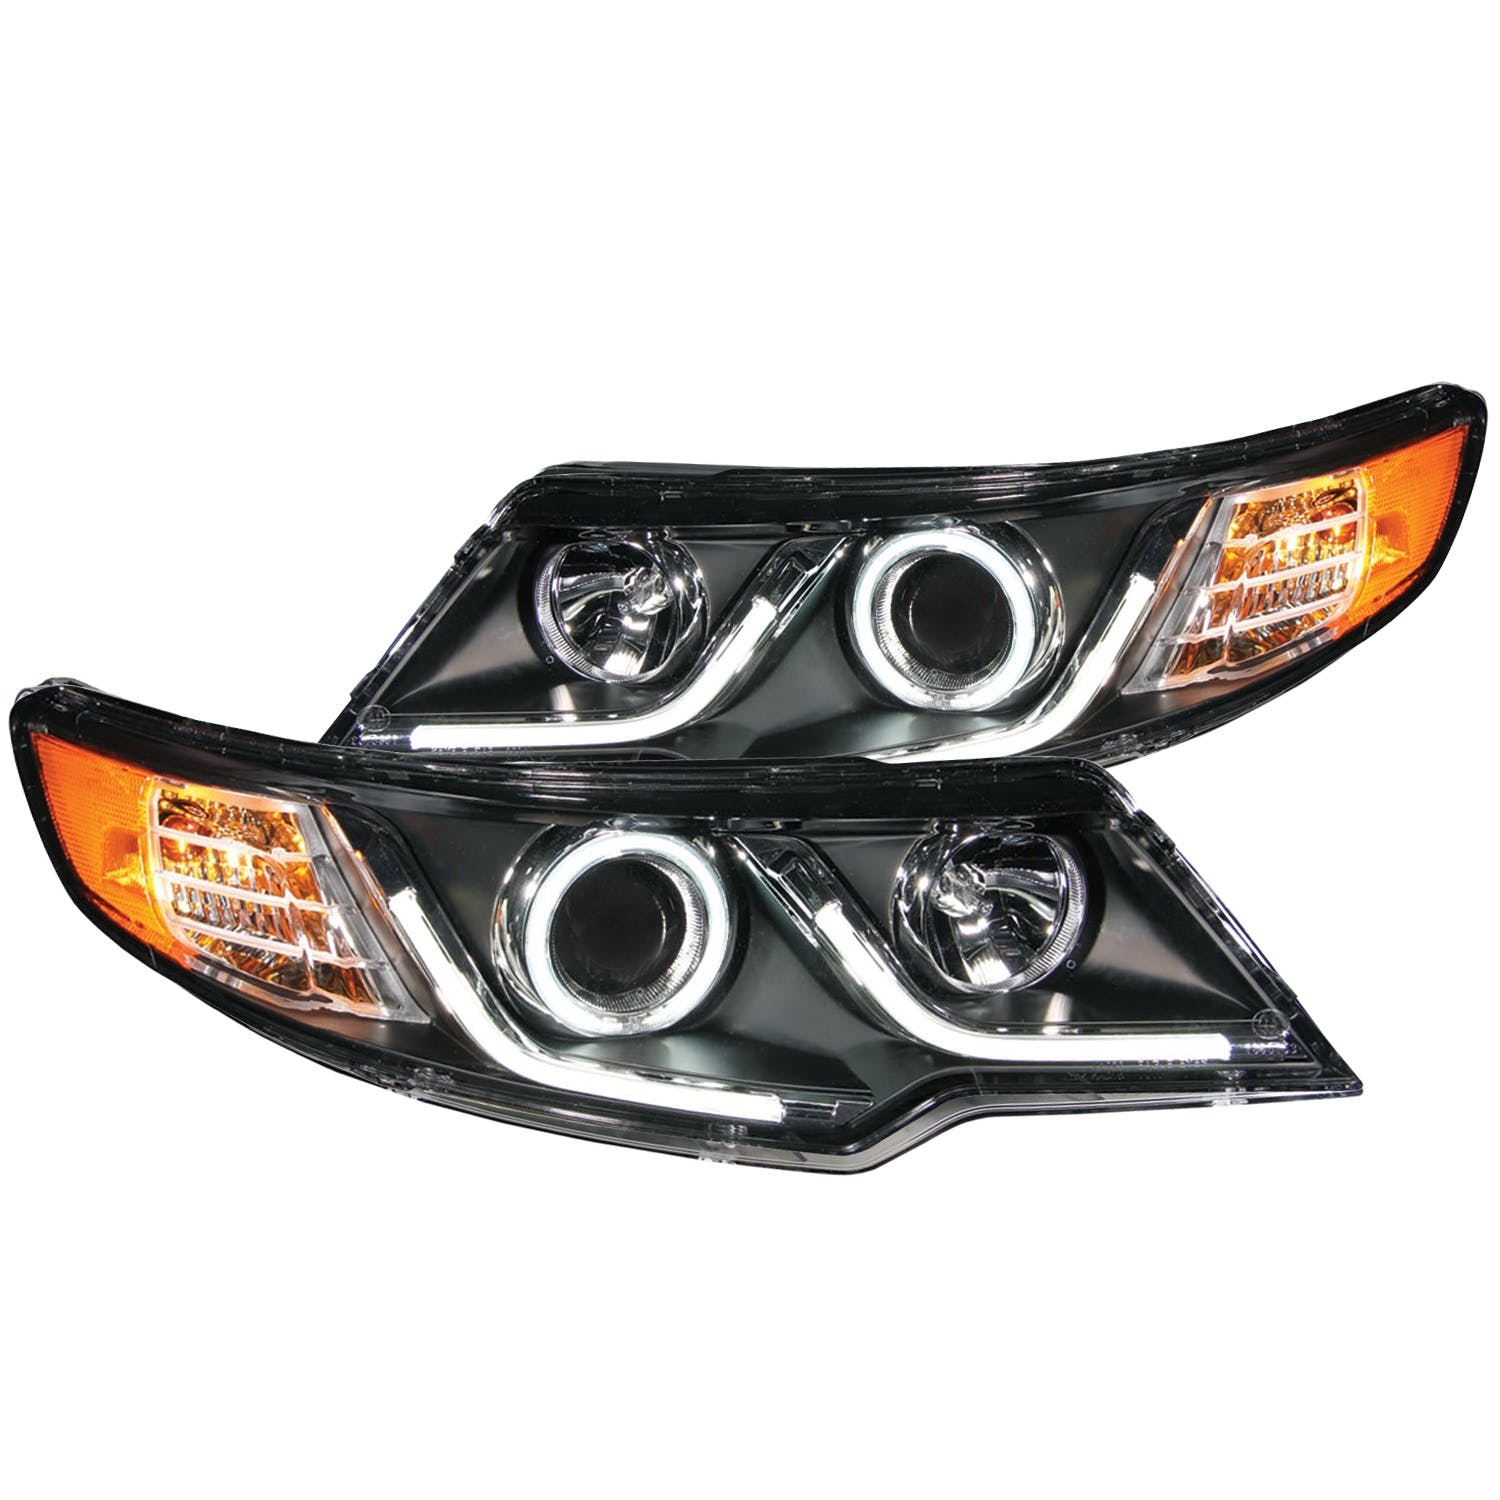 AnzoUSA 121458 Projector Headlight Set Clear Lens Black Housing G2 Pair (RX Halo)